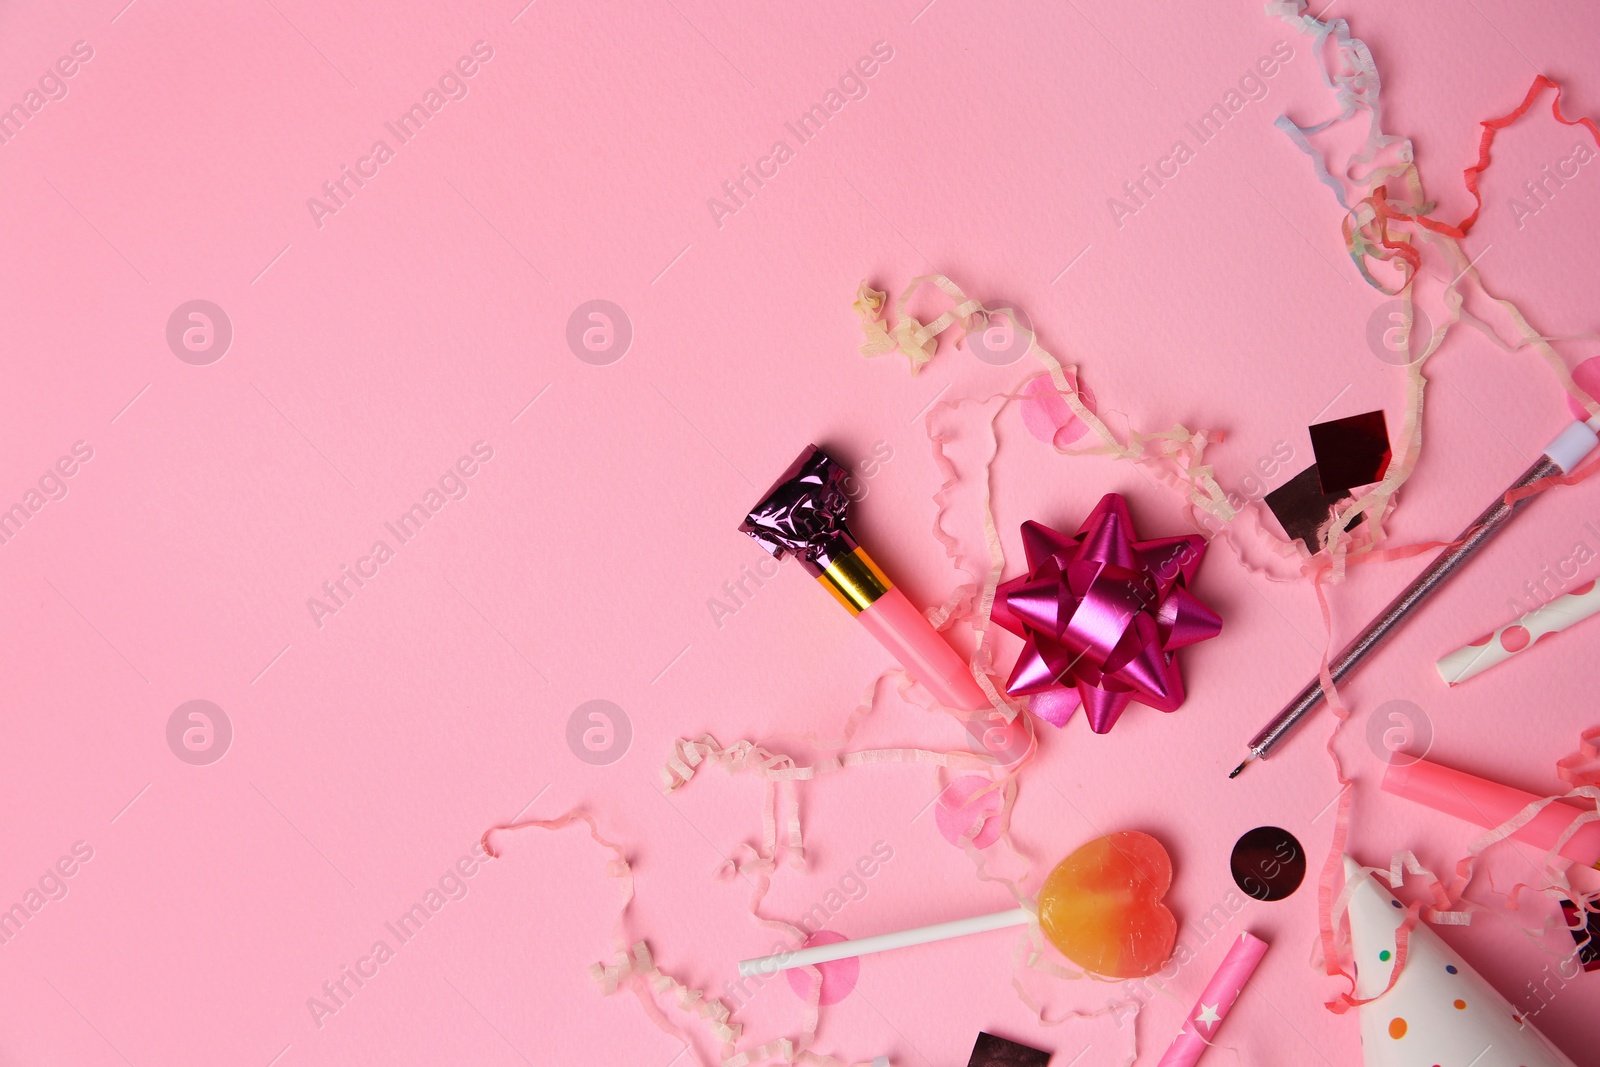 Photo of Party blower, lollipop and festive decor on pink background, flat lay. Space for text